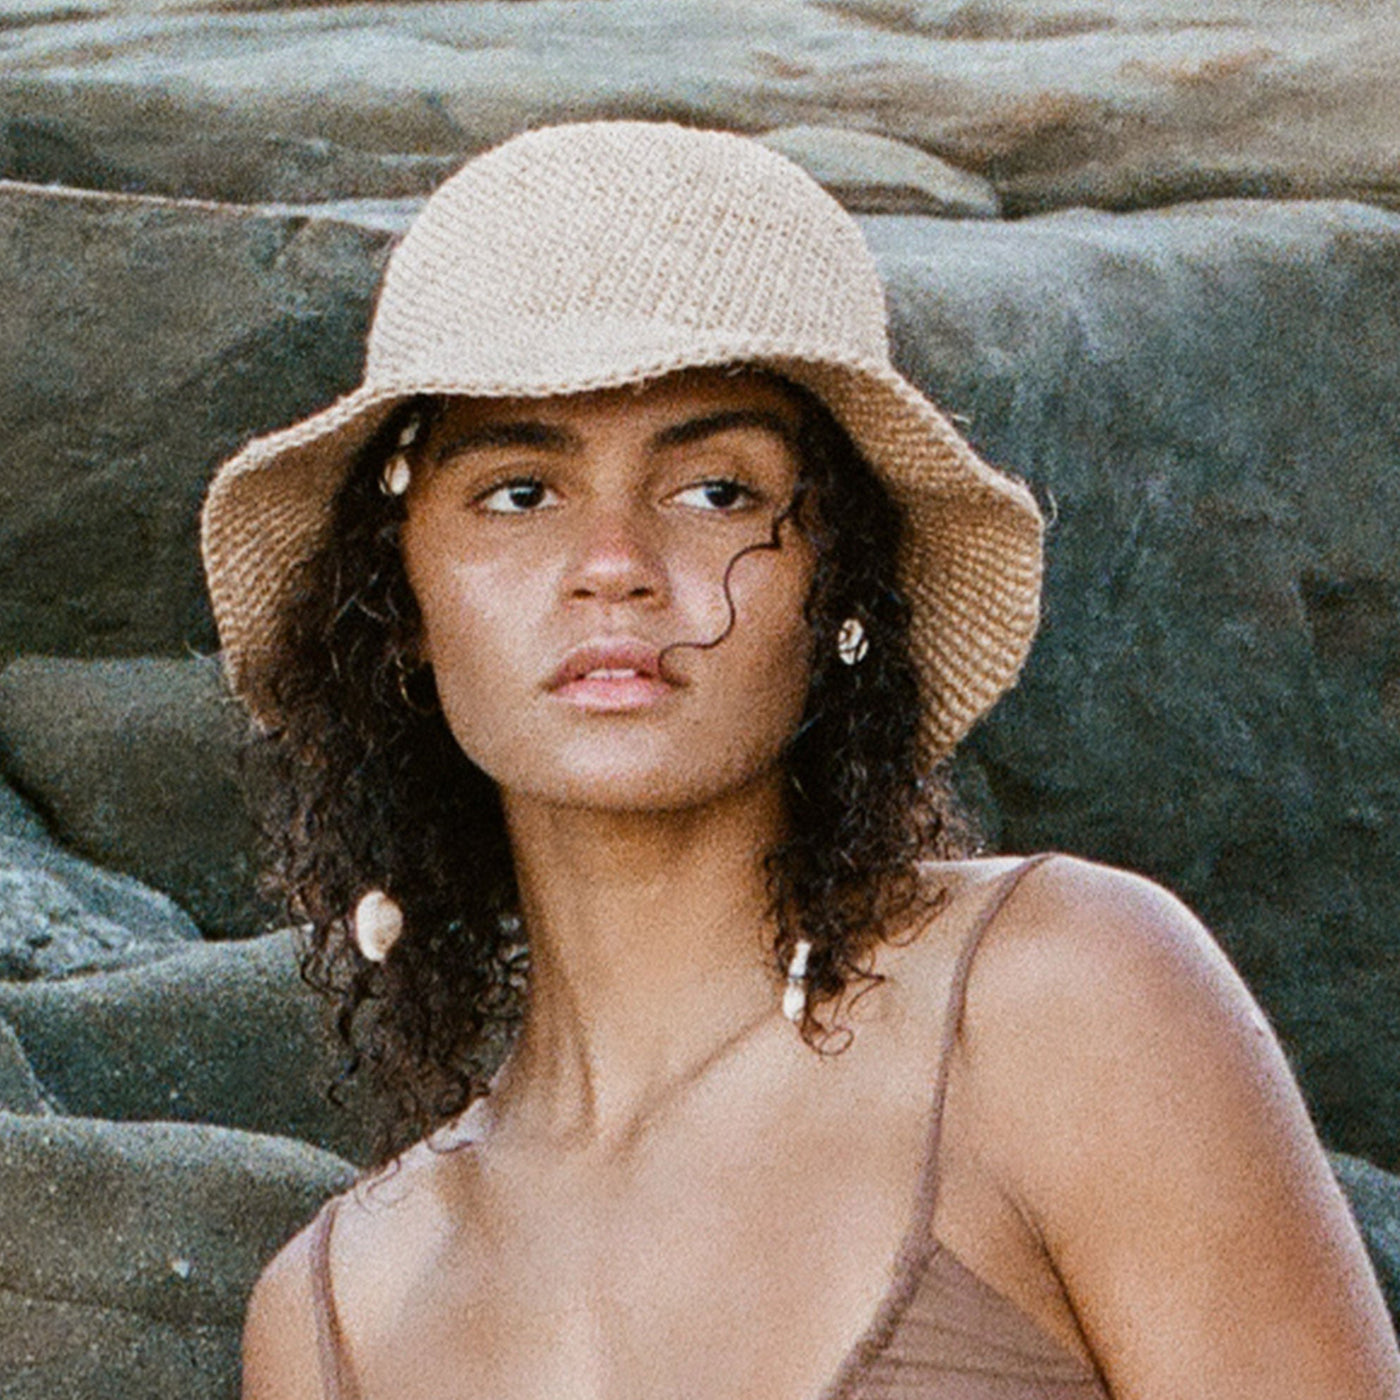 Summer Bucket Hat - Crocheted Natural by Made by Minga